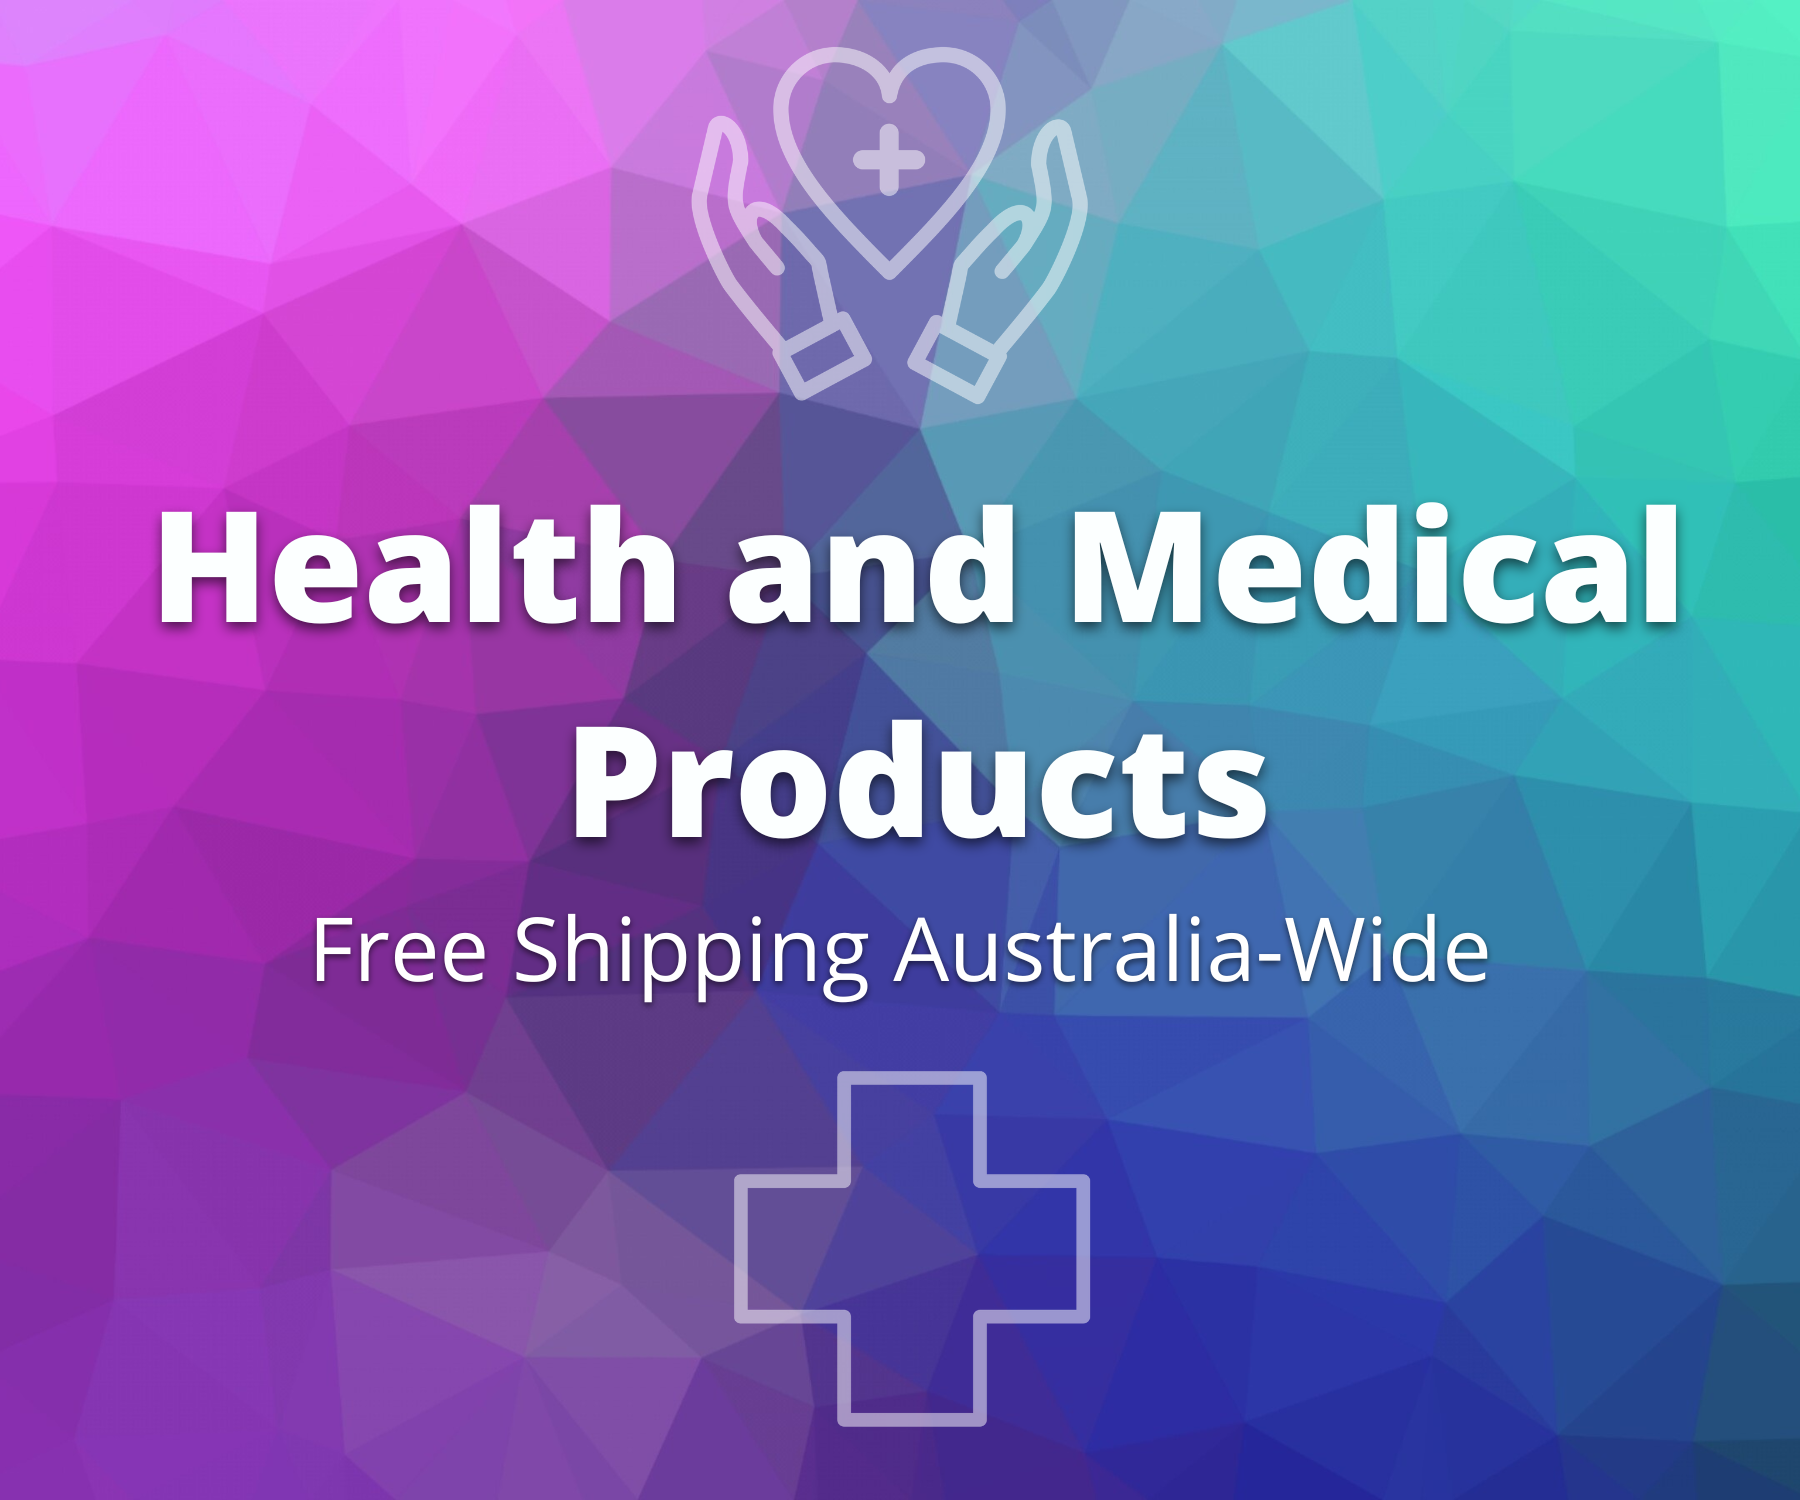 MyMedici Health and Medical Products Australia Main Banner (1200 × 1200 px)